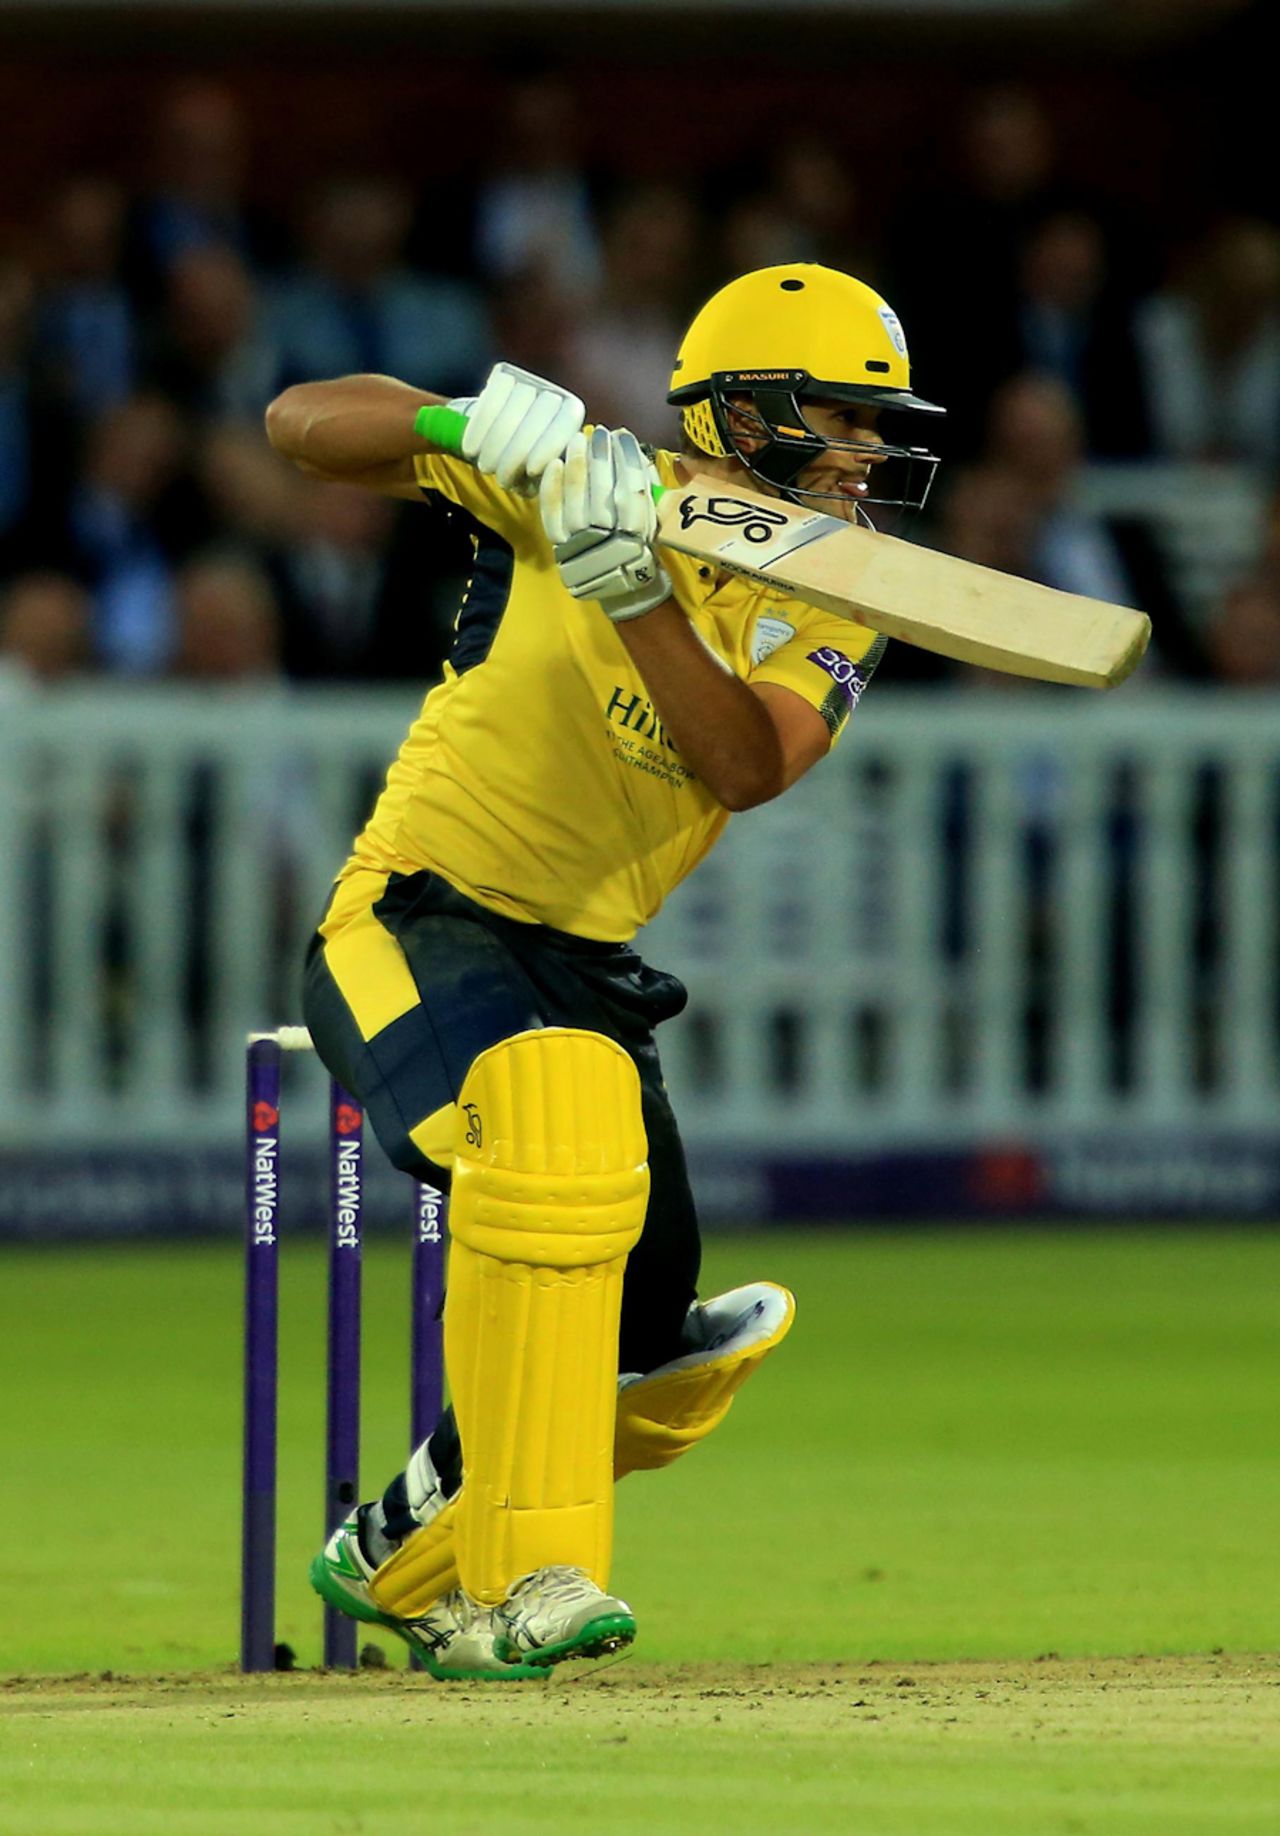 Rilee Rossouw shook off a blow on the helmet to lead Hampshire home, Middlesex v Hampshire, NatWest Blast, South Group, August 3, 2017